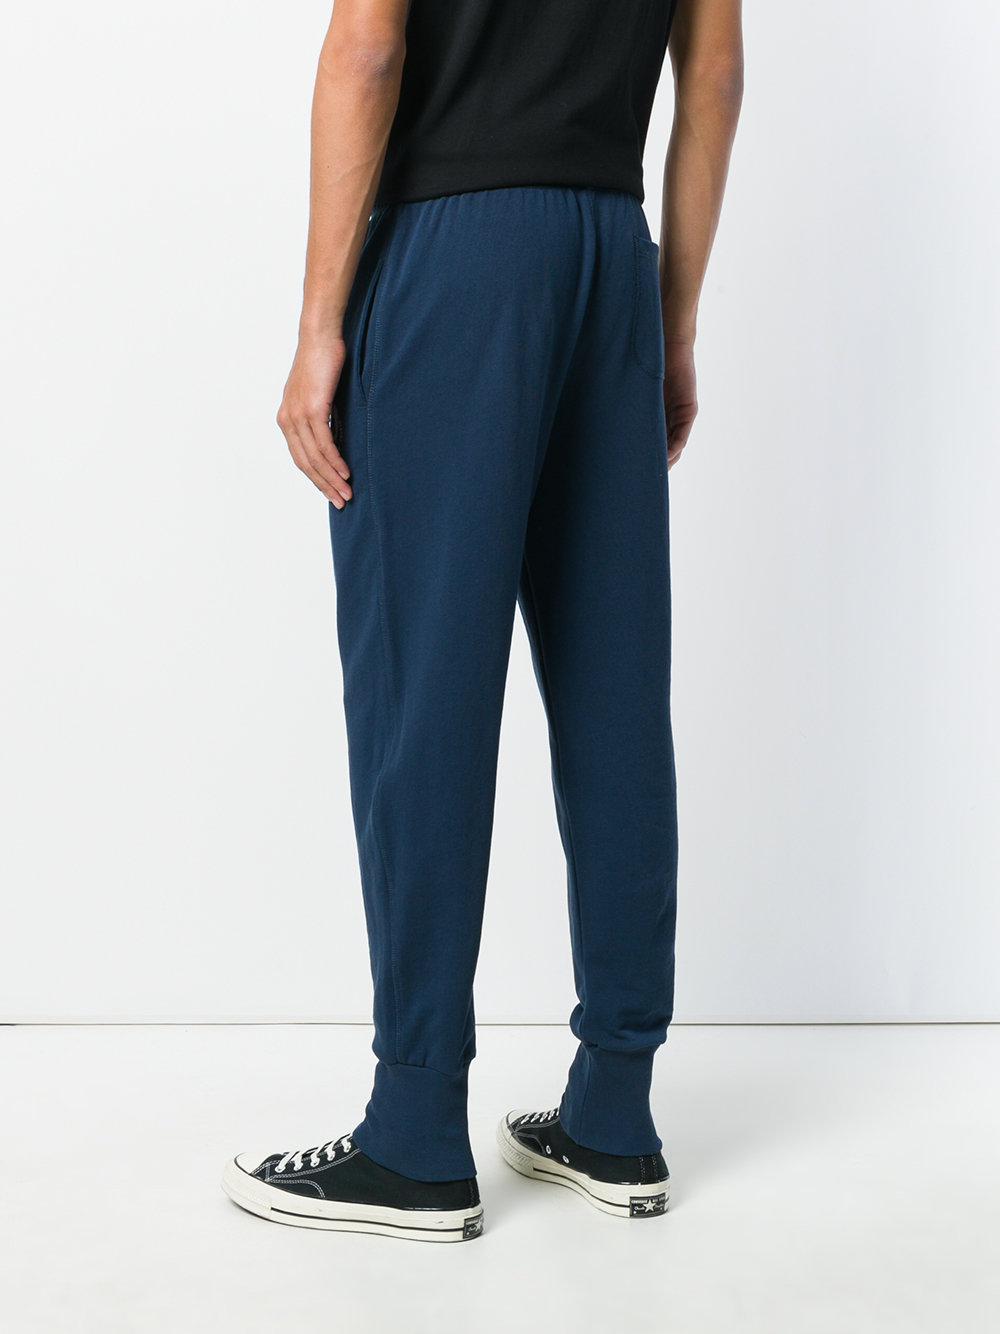 Lyst - Diesel Only The Brave Sweatpants in Blue for Men